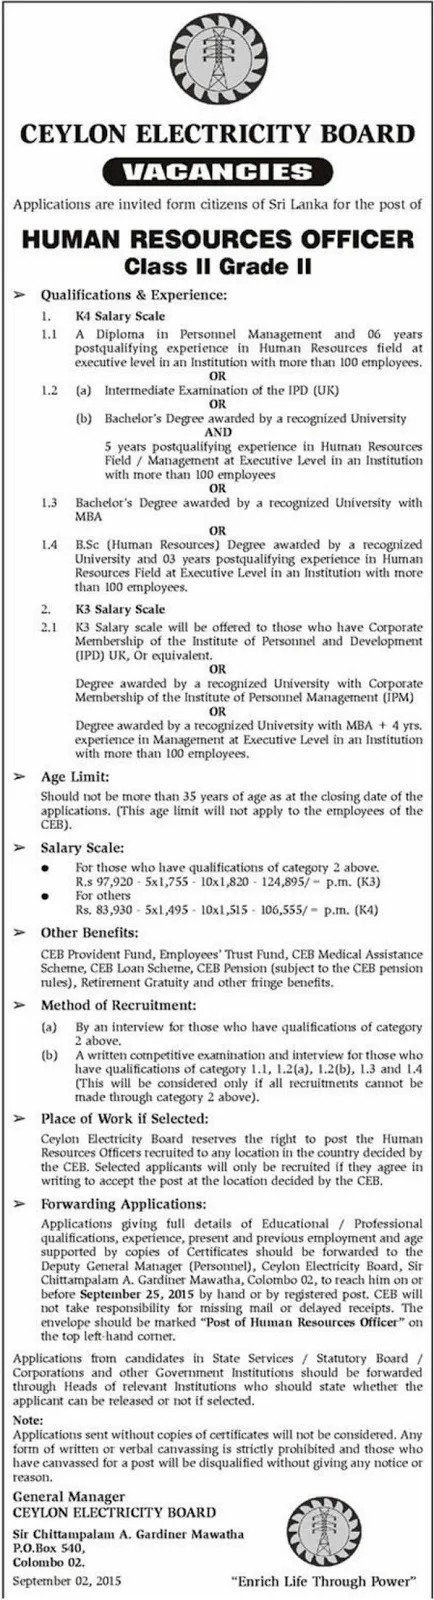 Human Resources Officer Vacancy in Ceylon Electricity Board